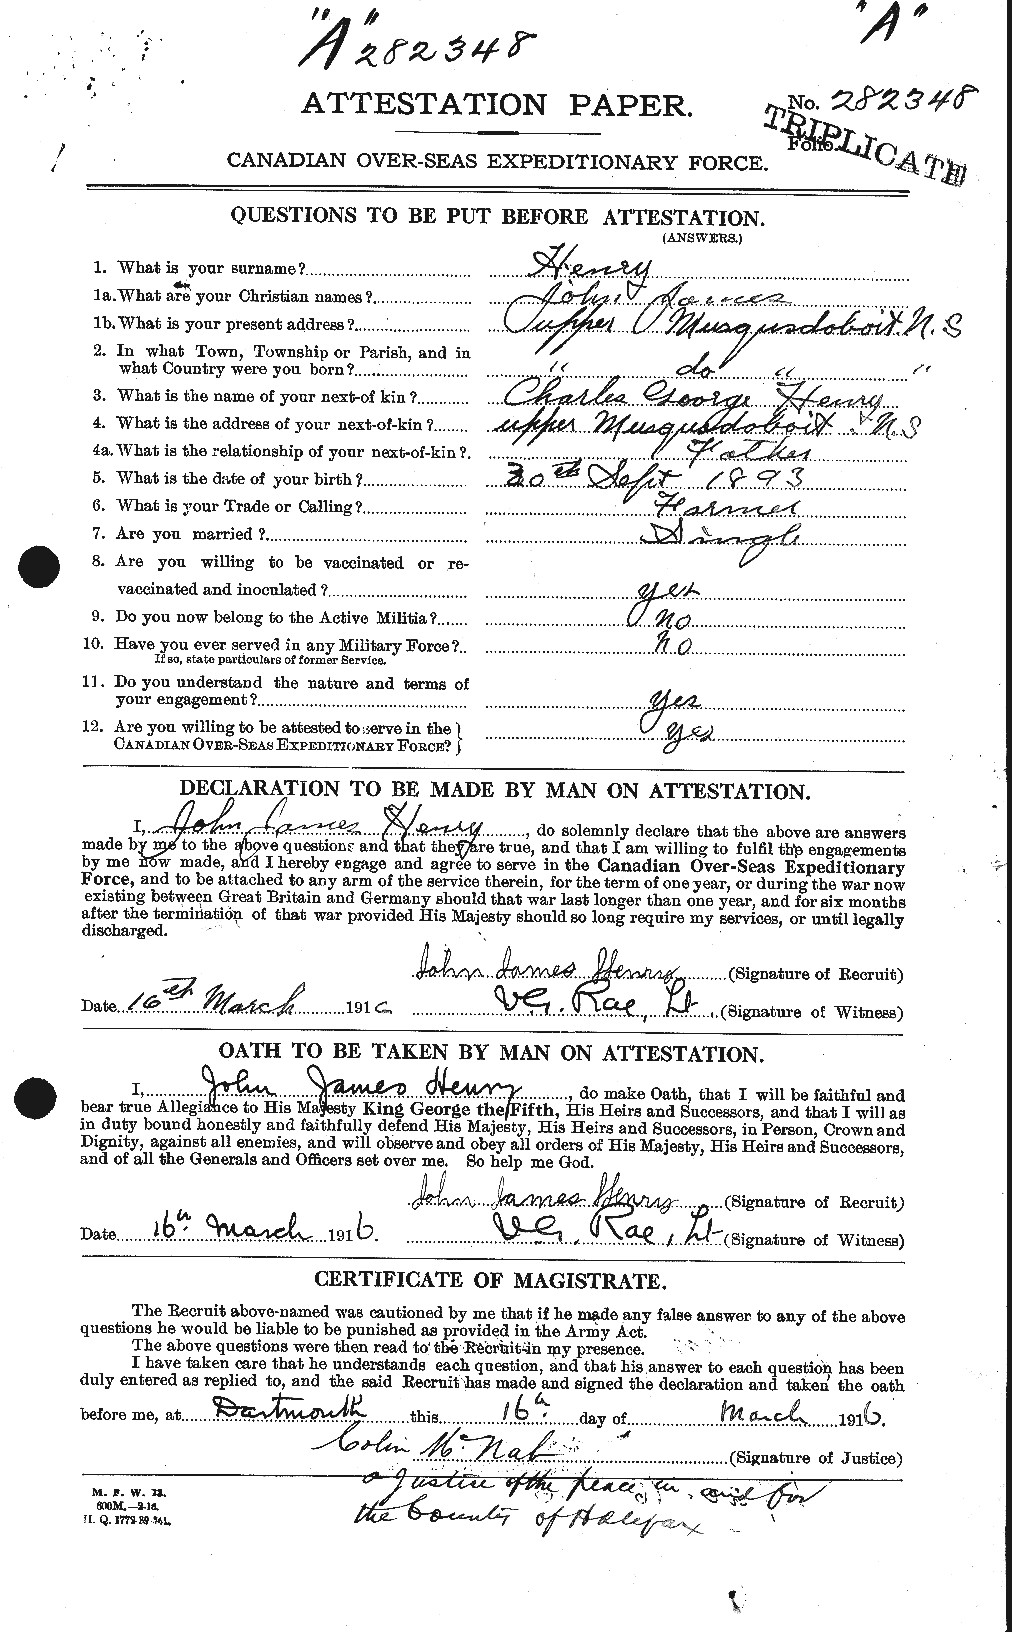 Personnel Records of the First World War - CEF 387628a